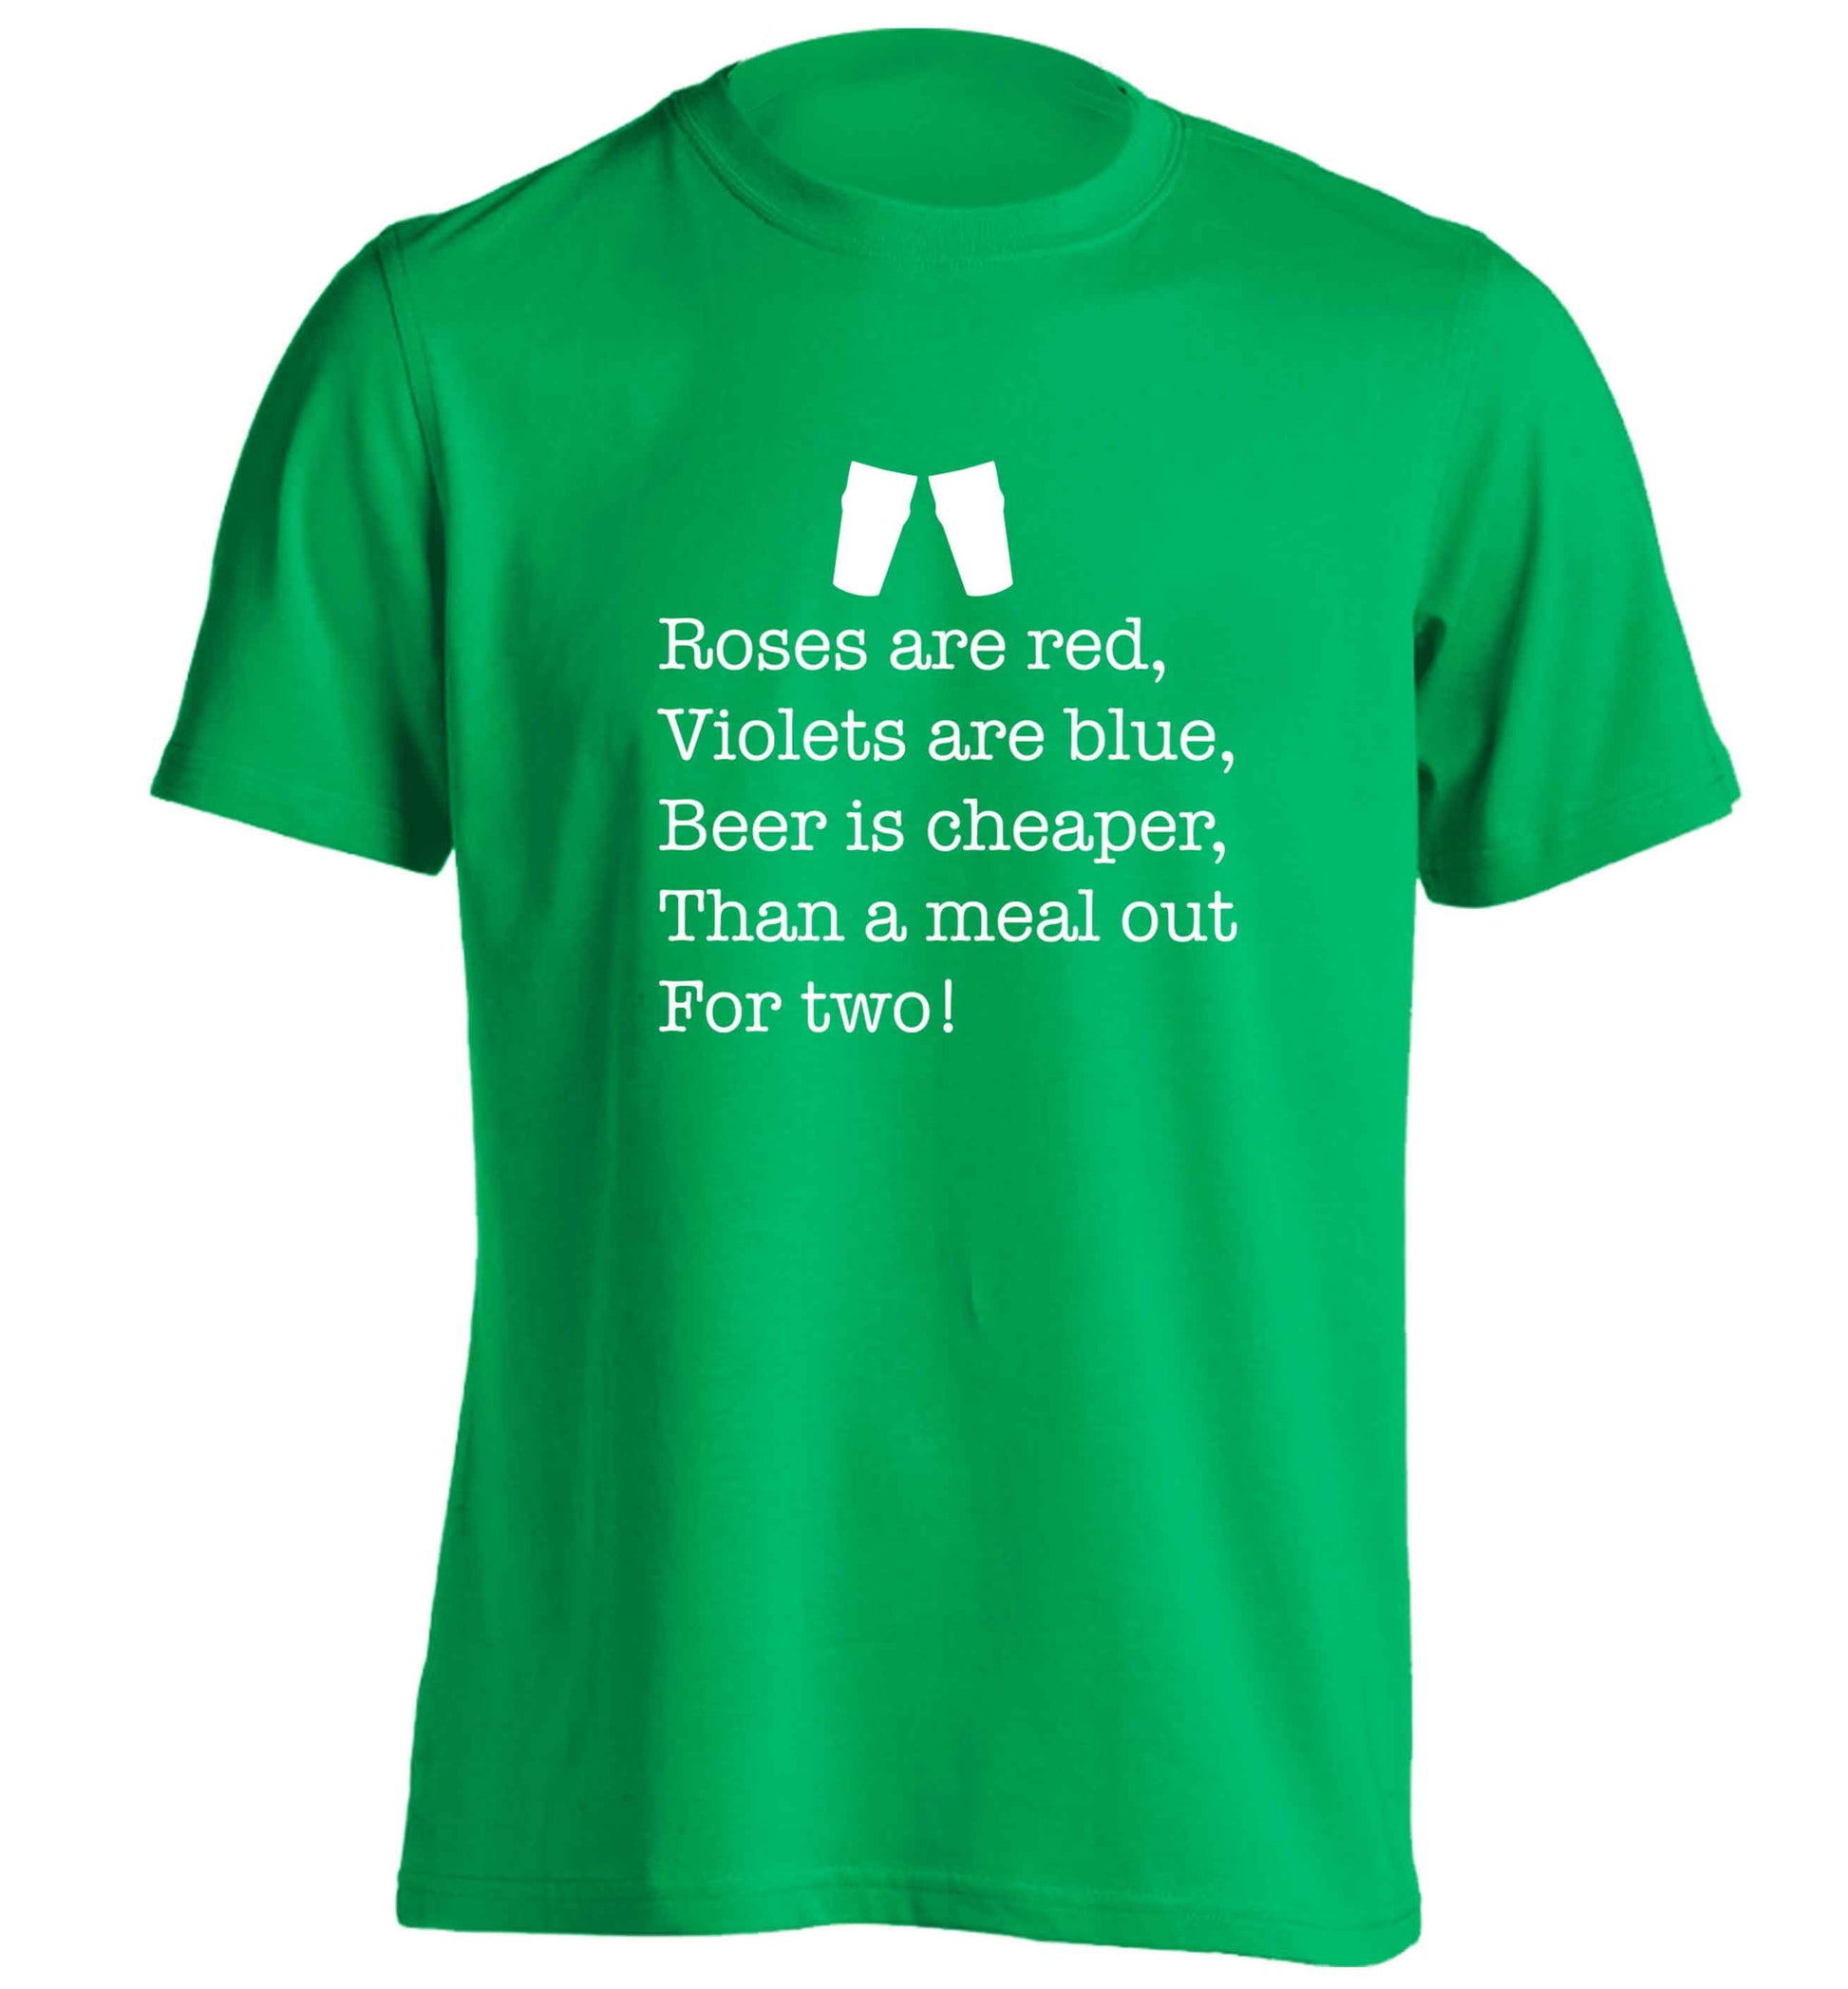 Roses are red violets are blue beer is cheaper than a meal out for two adults unisex green Tshirt 2XL